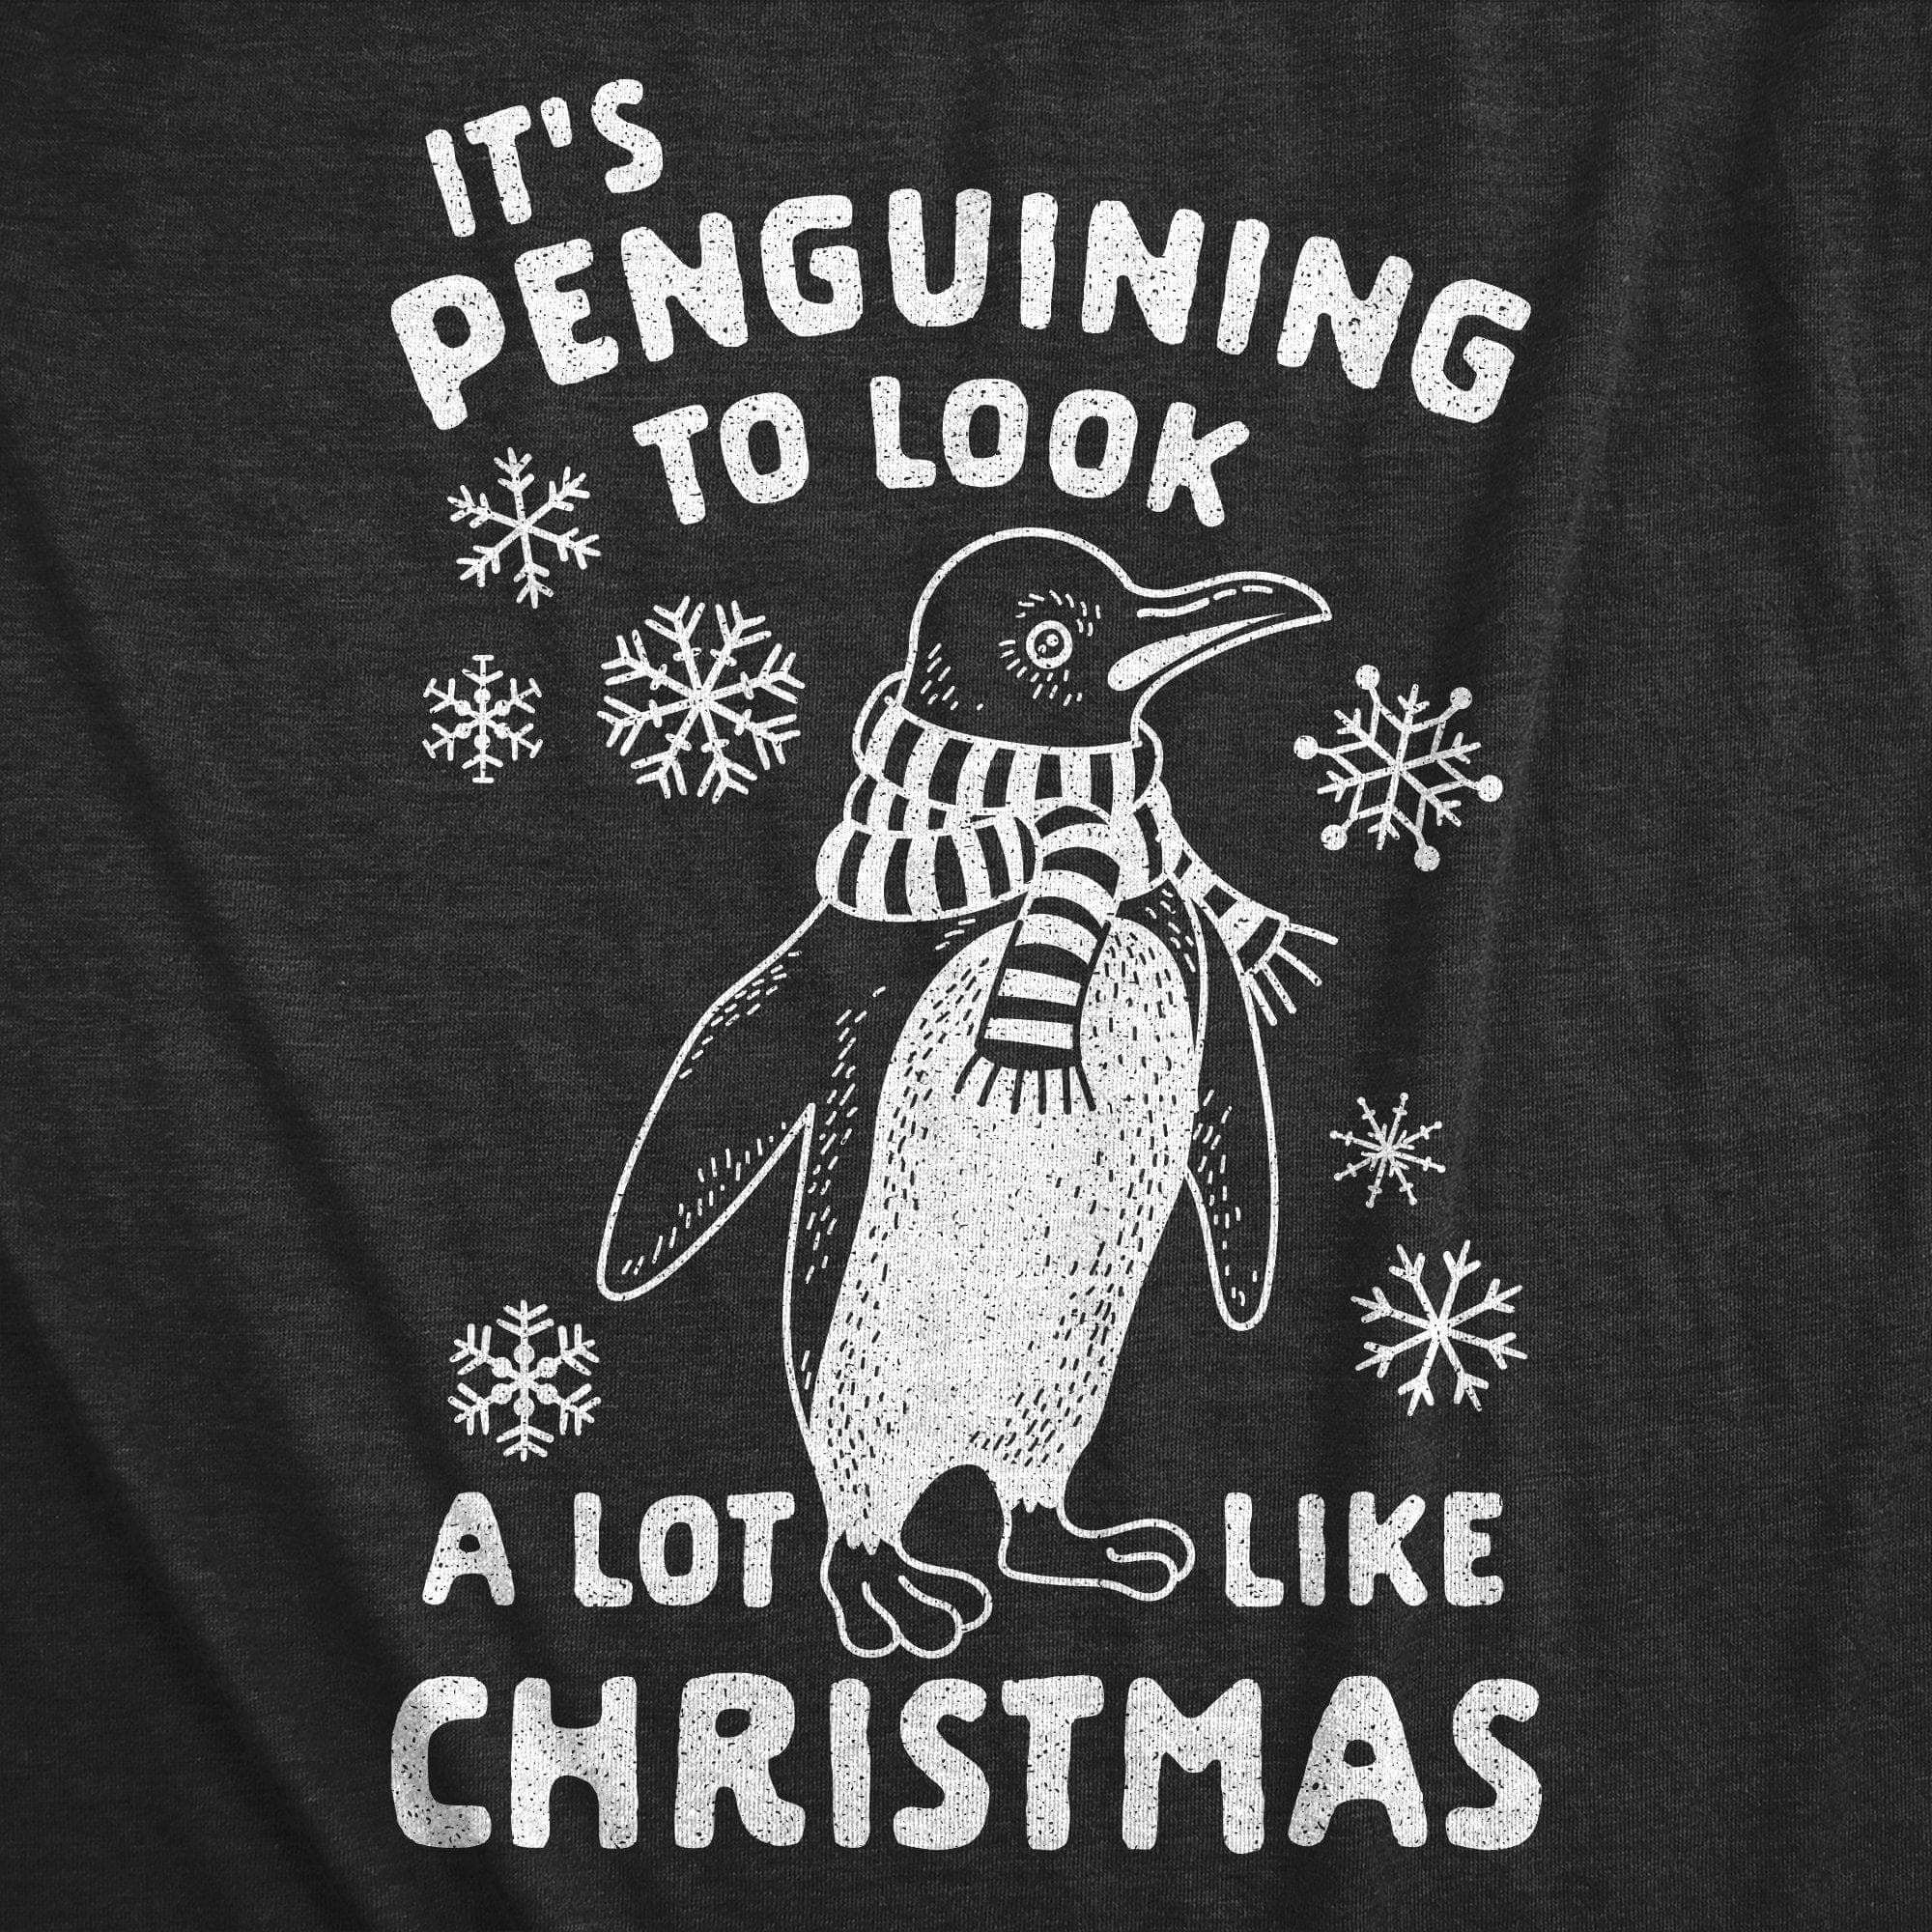 It's Penguining To Look A Lot Like Christmas Men's Tshirt - Crazy Dog T-Shirts